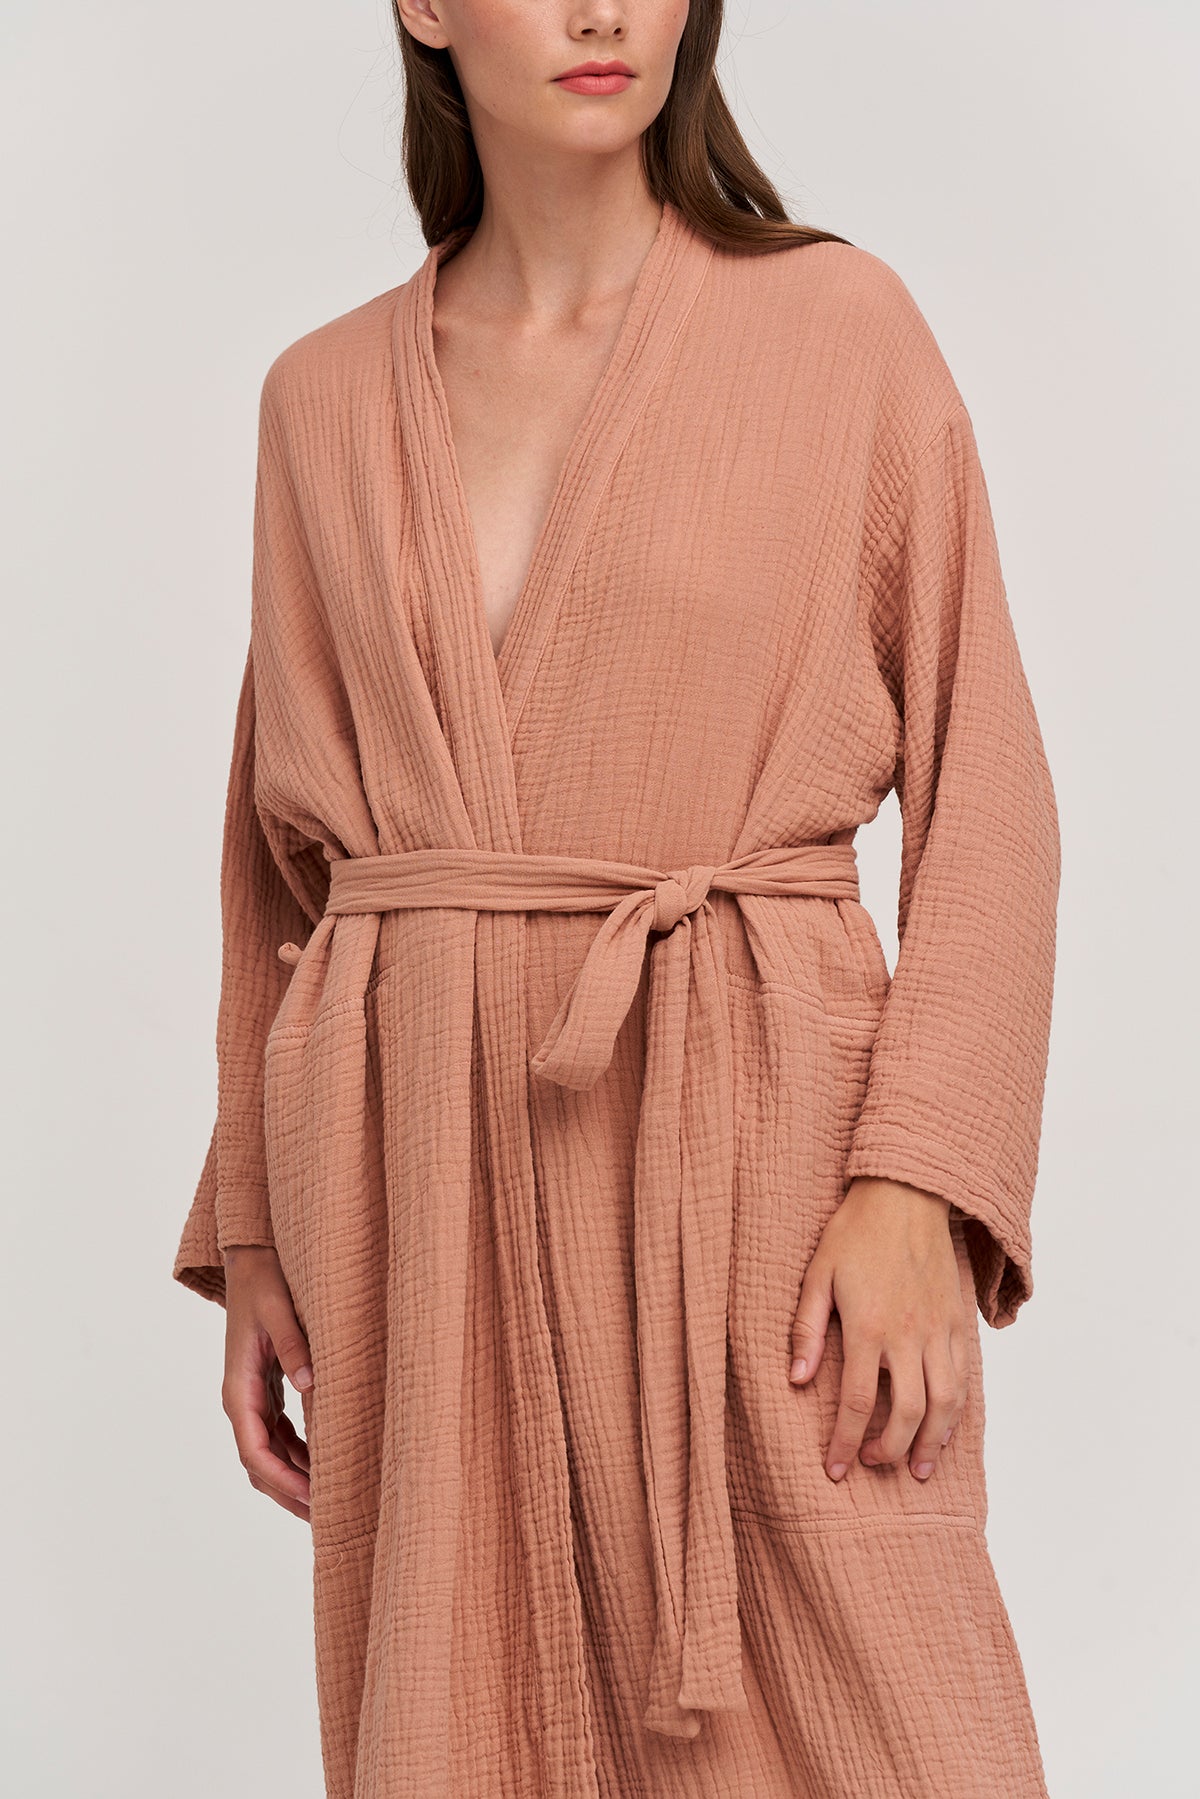 Cotton Robe Posey Front Detail-22671276441793